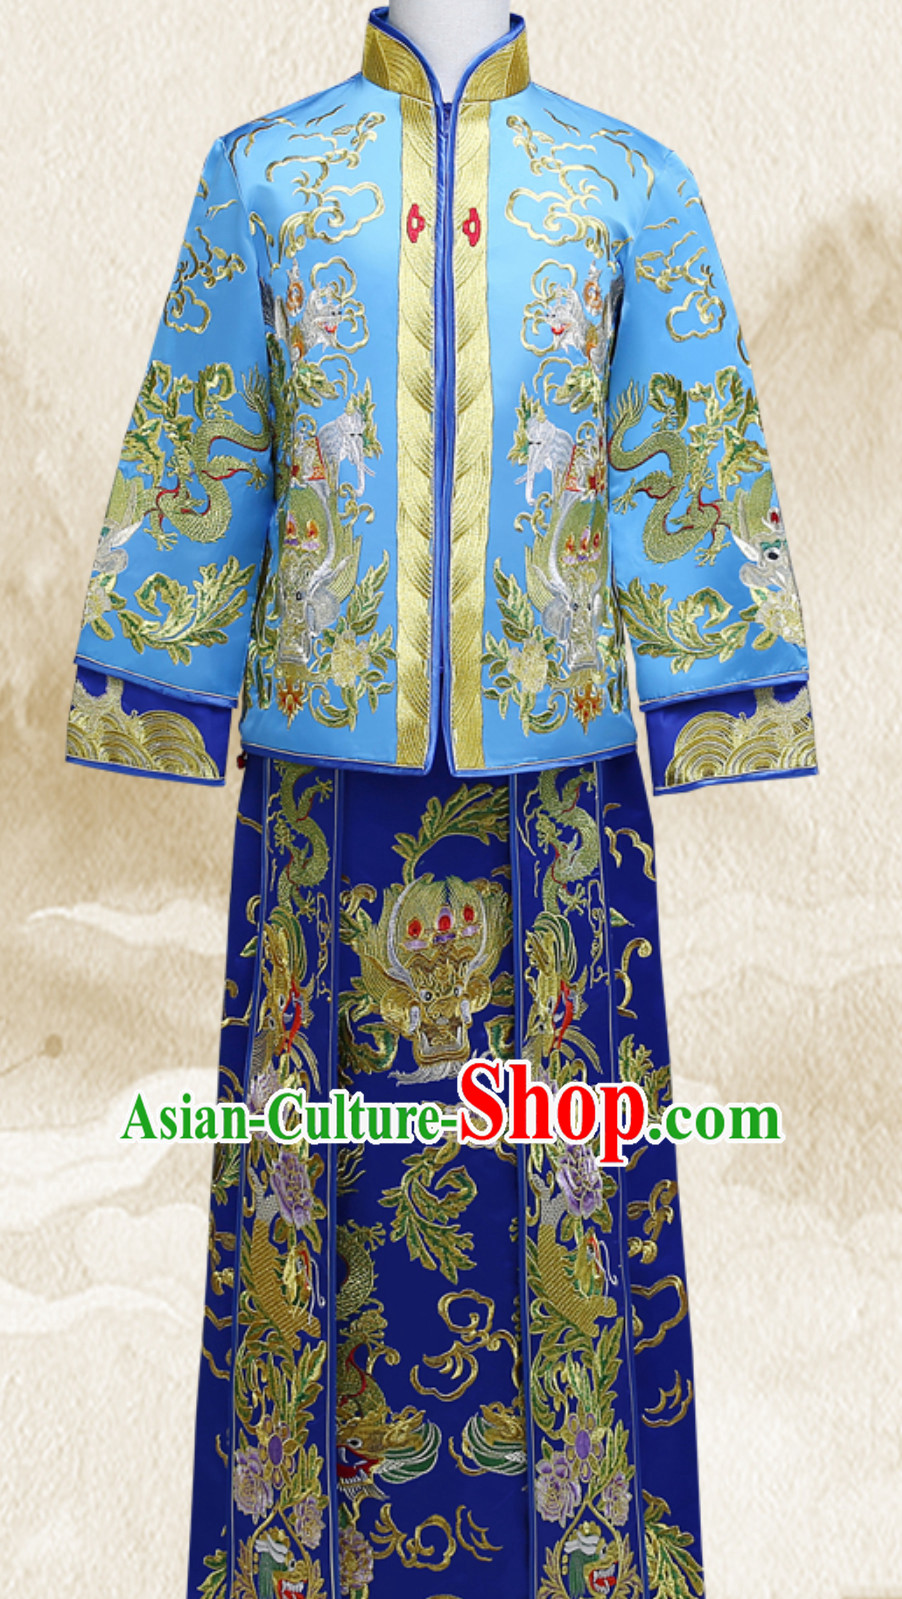 Embroidered Bridegroom Chinese Traditional Wedding Dresses Ceremonial Clothing China Wedding Dress for Men